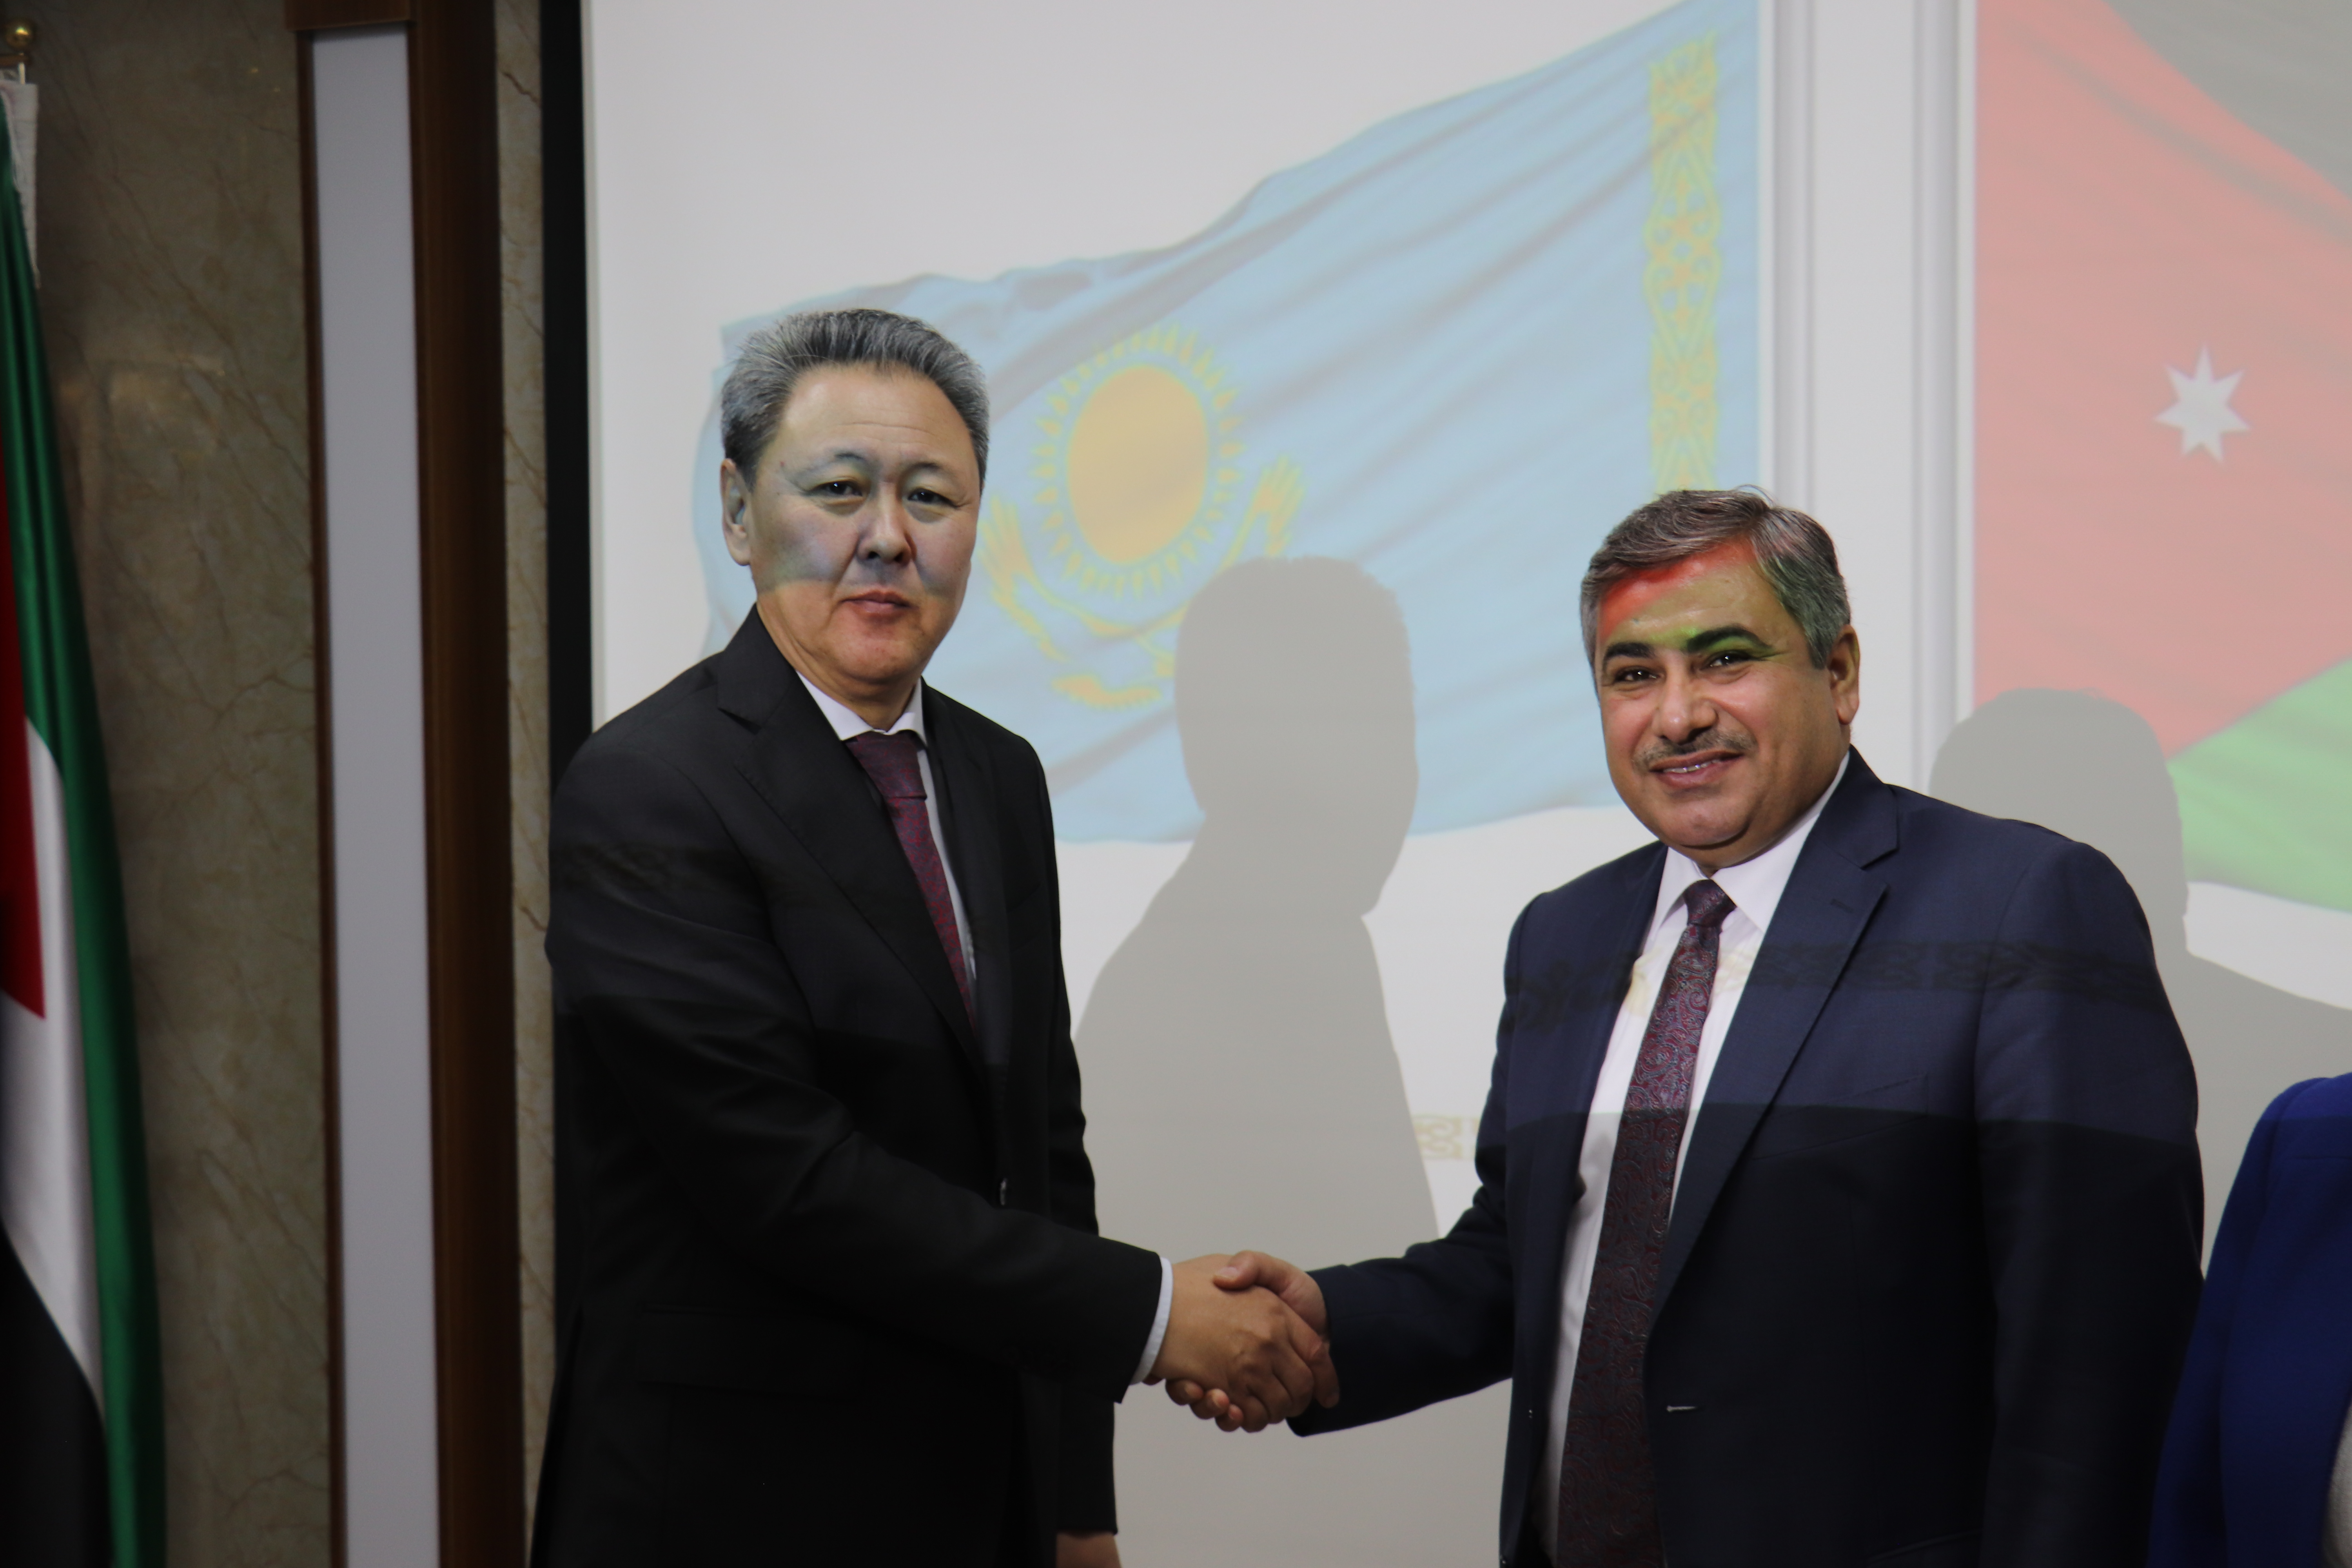 Members of the Jordanian Parliament Highly Appreciated the Reforms Carried Out by Kazakhstan